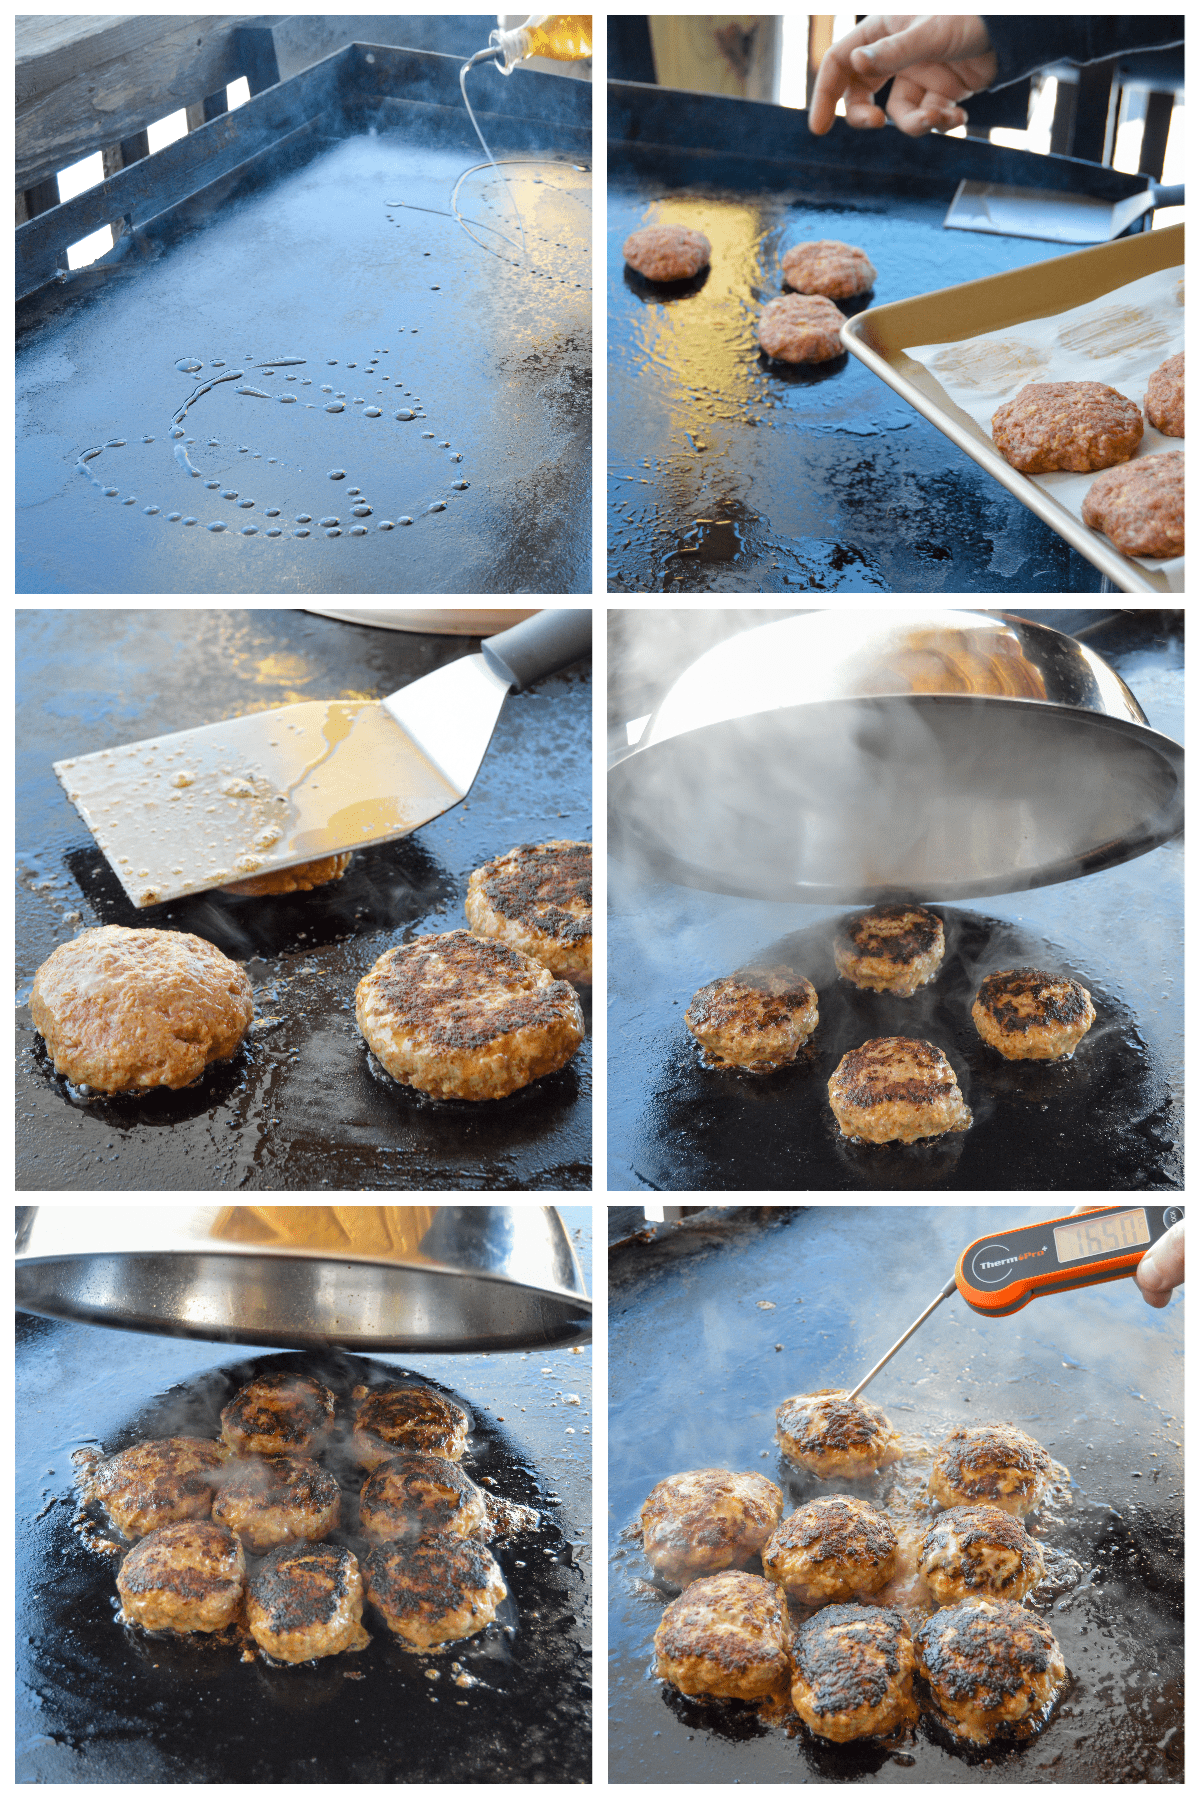 Kotlety being cooked on Outdoor griddle collage